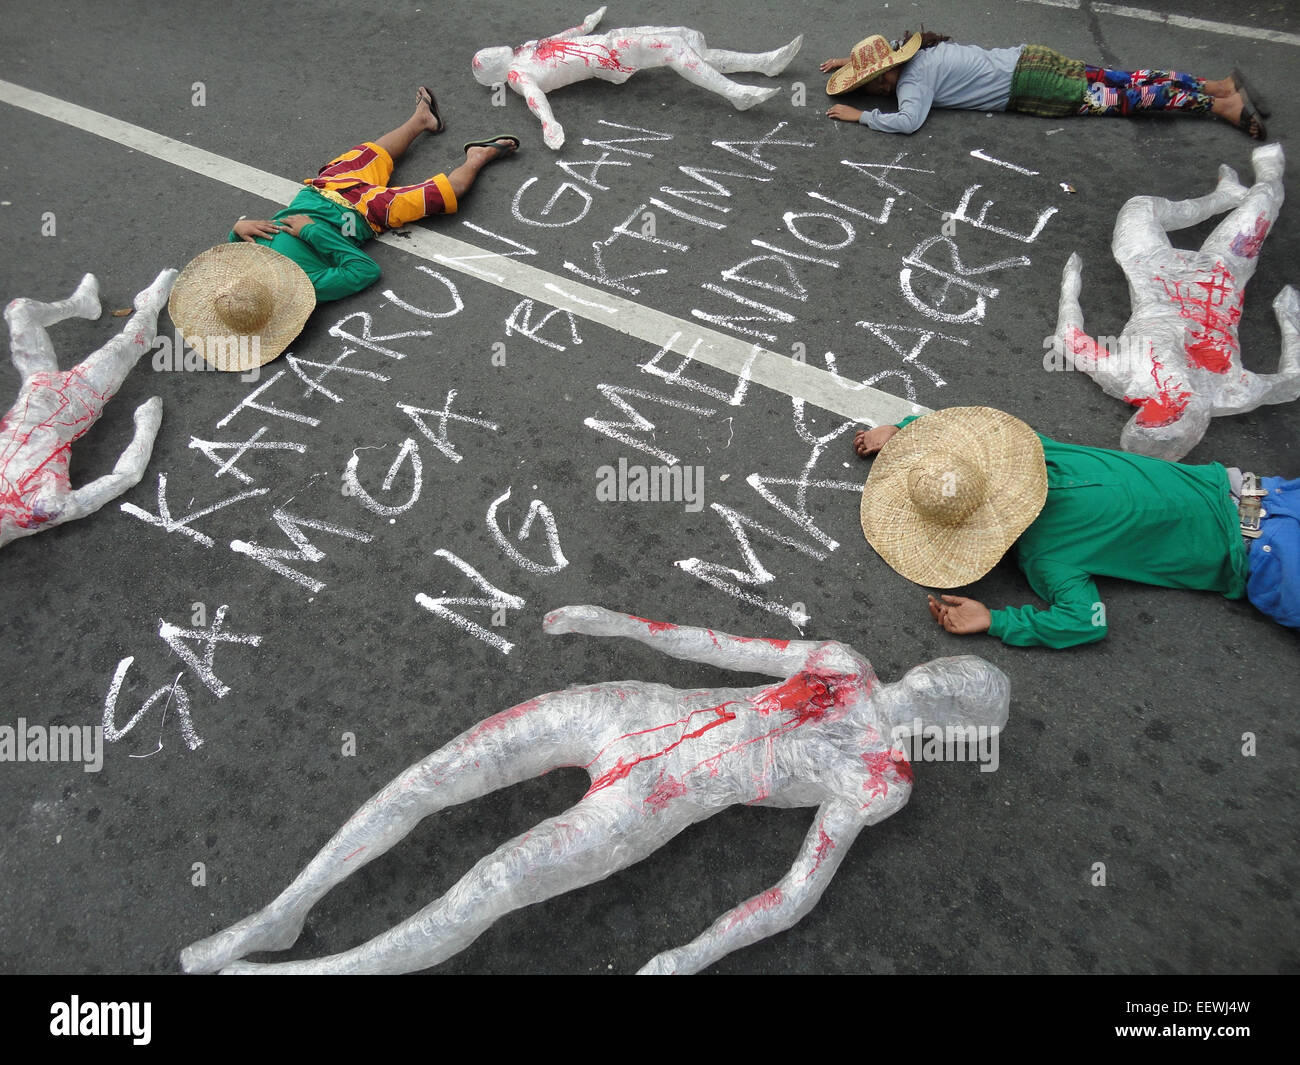 Filipino protesters, along with 'wounded' dummies, lie around a painted message that reads, 'Justice for the victims of Mendiola Massacre!' at Mendiola bridge, as they commemorate the 28th anniversary of the Mendiola Massacre that occured under the administration of President Benigno Aquino III's mother, former President Corazon Aquino, where thirteen farmers were killed. Anakpawis Partylist representative Fernando Hicap has filed a bill at Congress proposing to declare January 22, the anniversary of the Mendiola Massacre, a special holiday called 'Farmer's Day.' (Photo by Richard James Mendoz Stock Photo